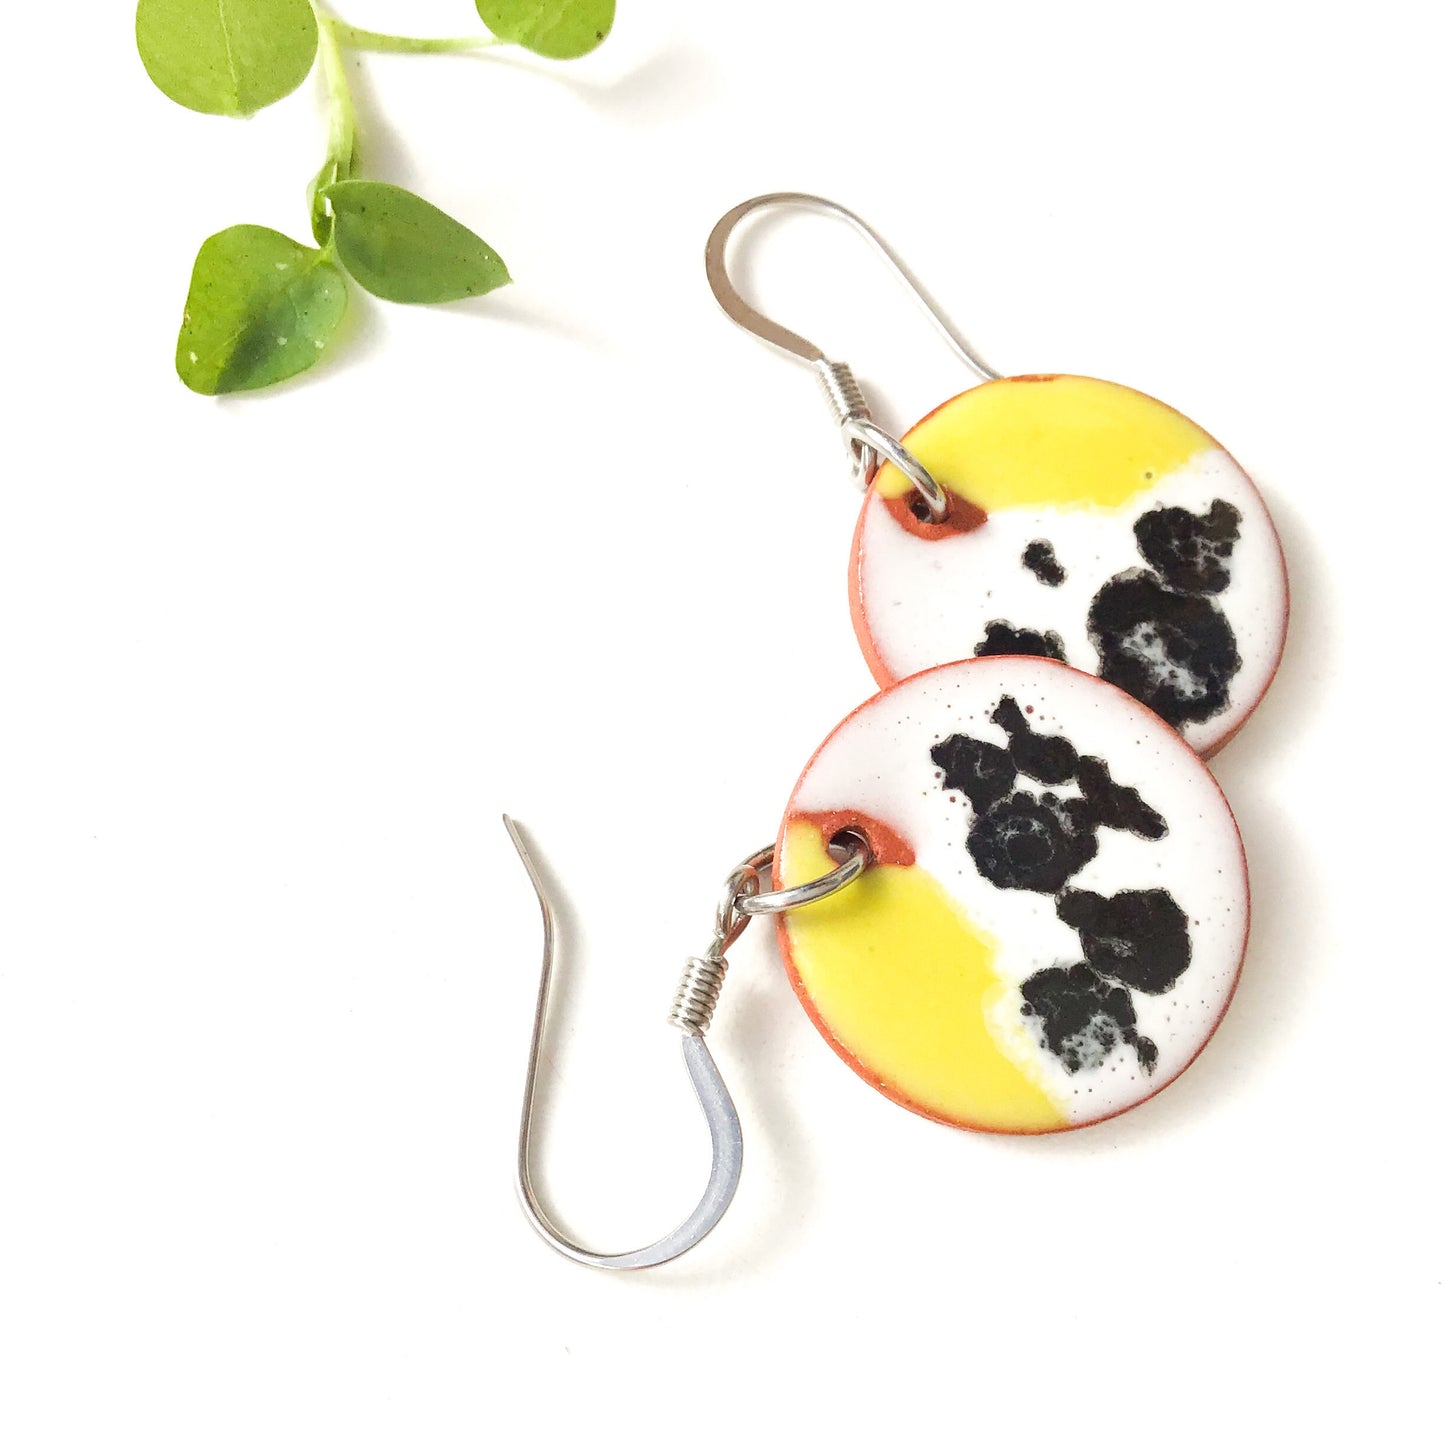 Color Contrast Earrings on Red Clay - Chartreuse + Black & White Ceramic Earrings